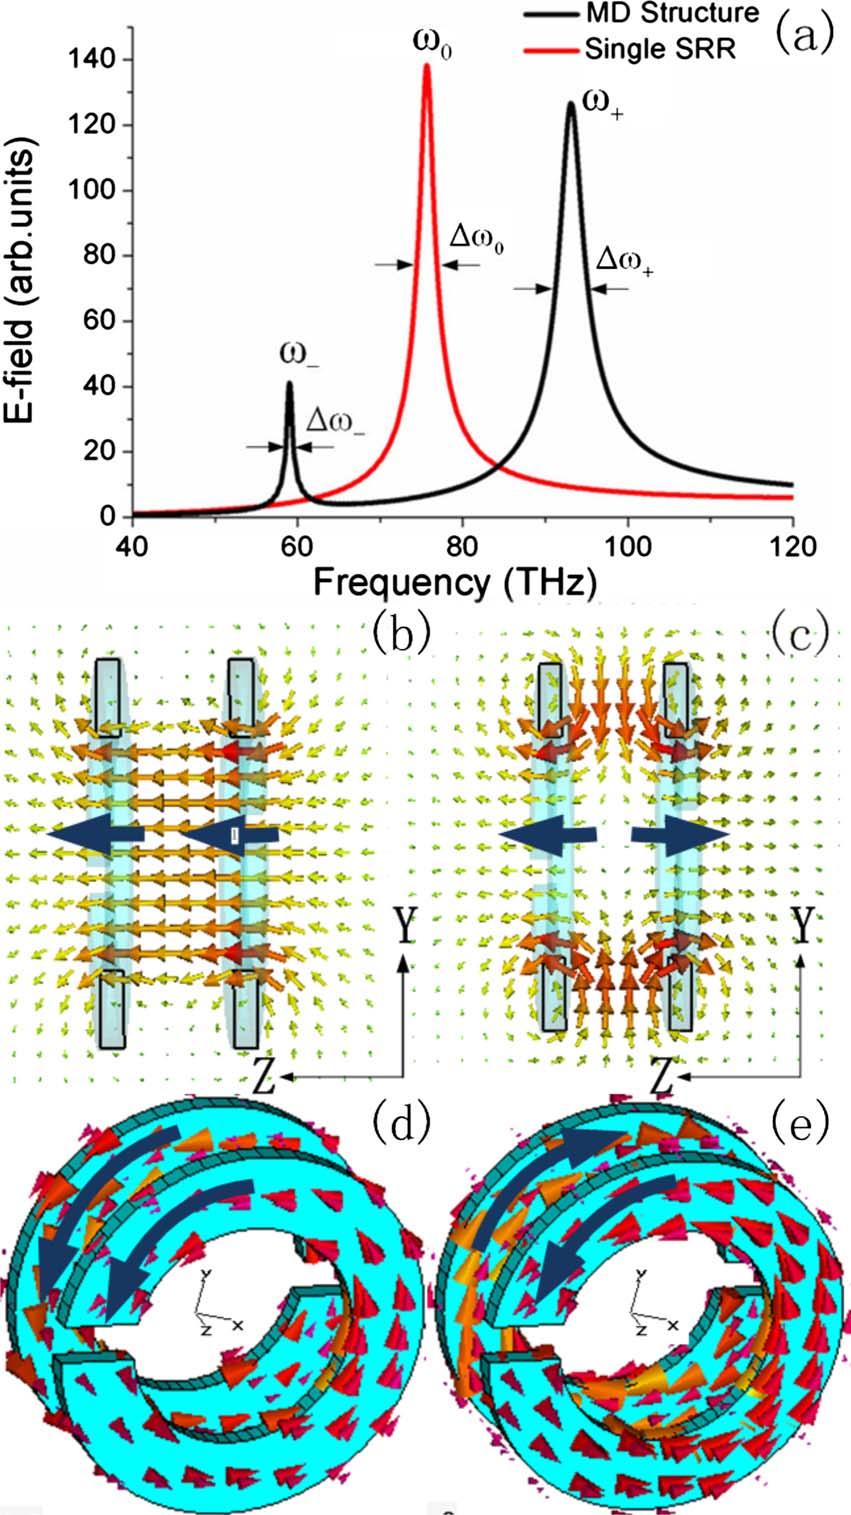 28 We used normally incident light with polarization along the y direction as we carried out the simulations for the excitation of these SRR dimer metamaterials Fig. 1.